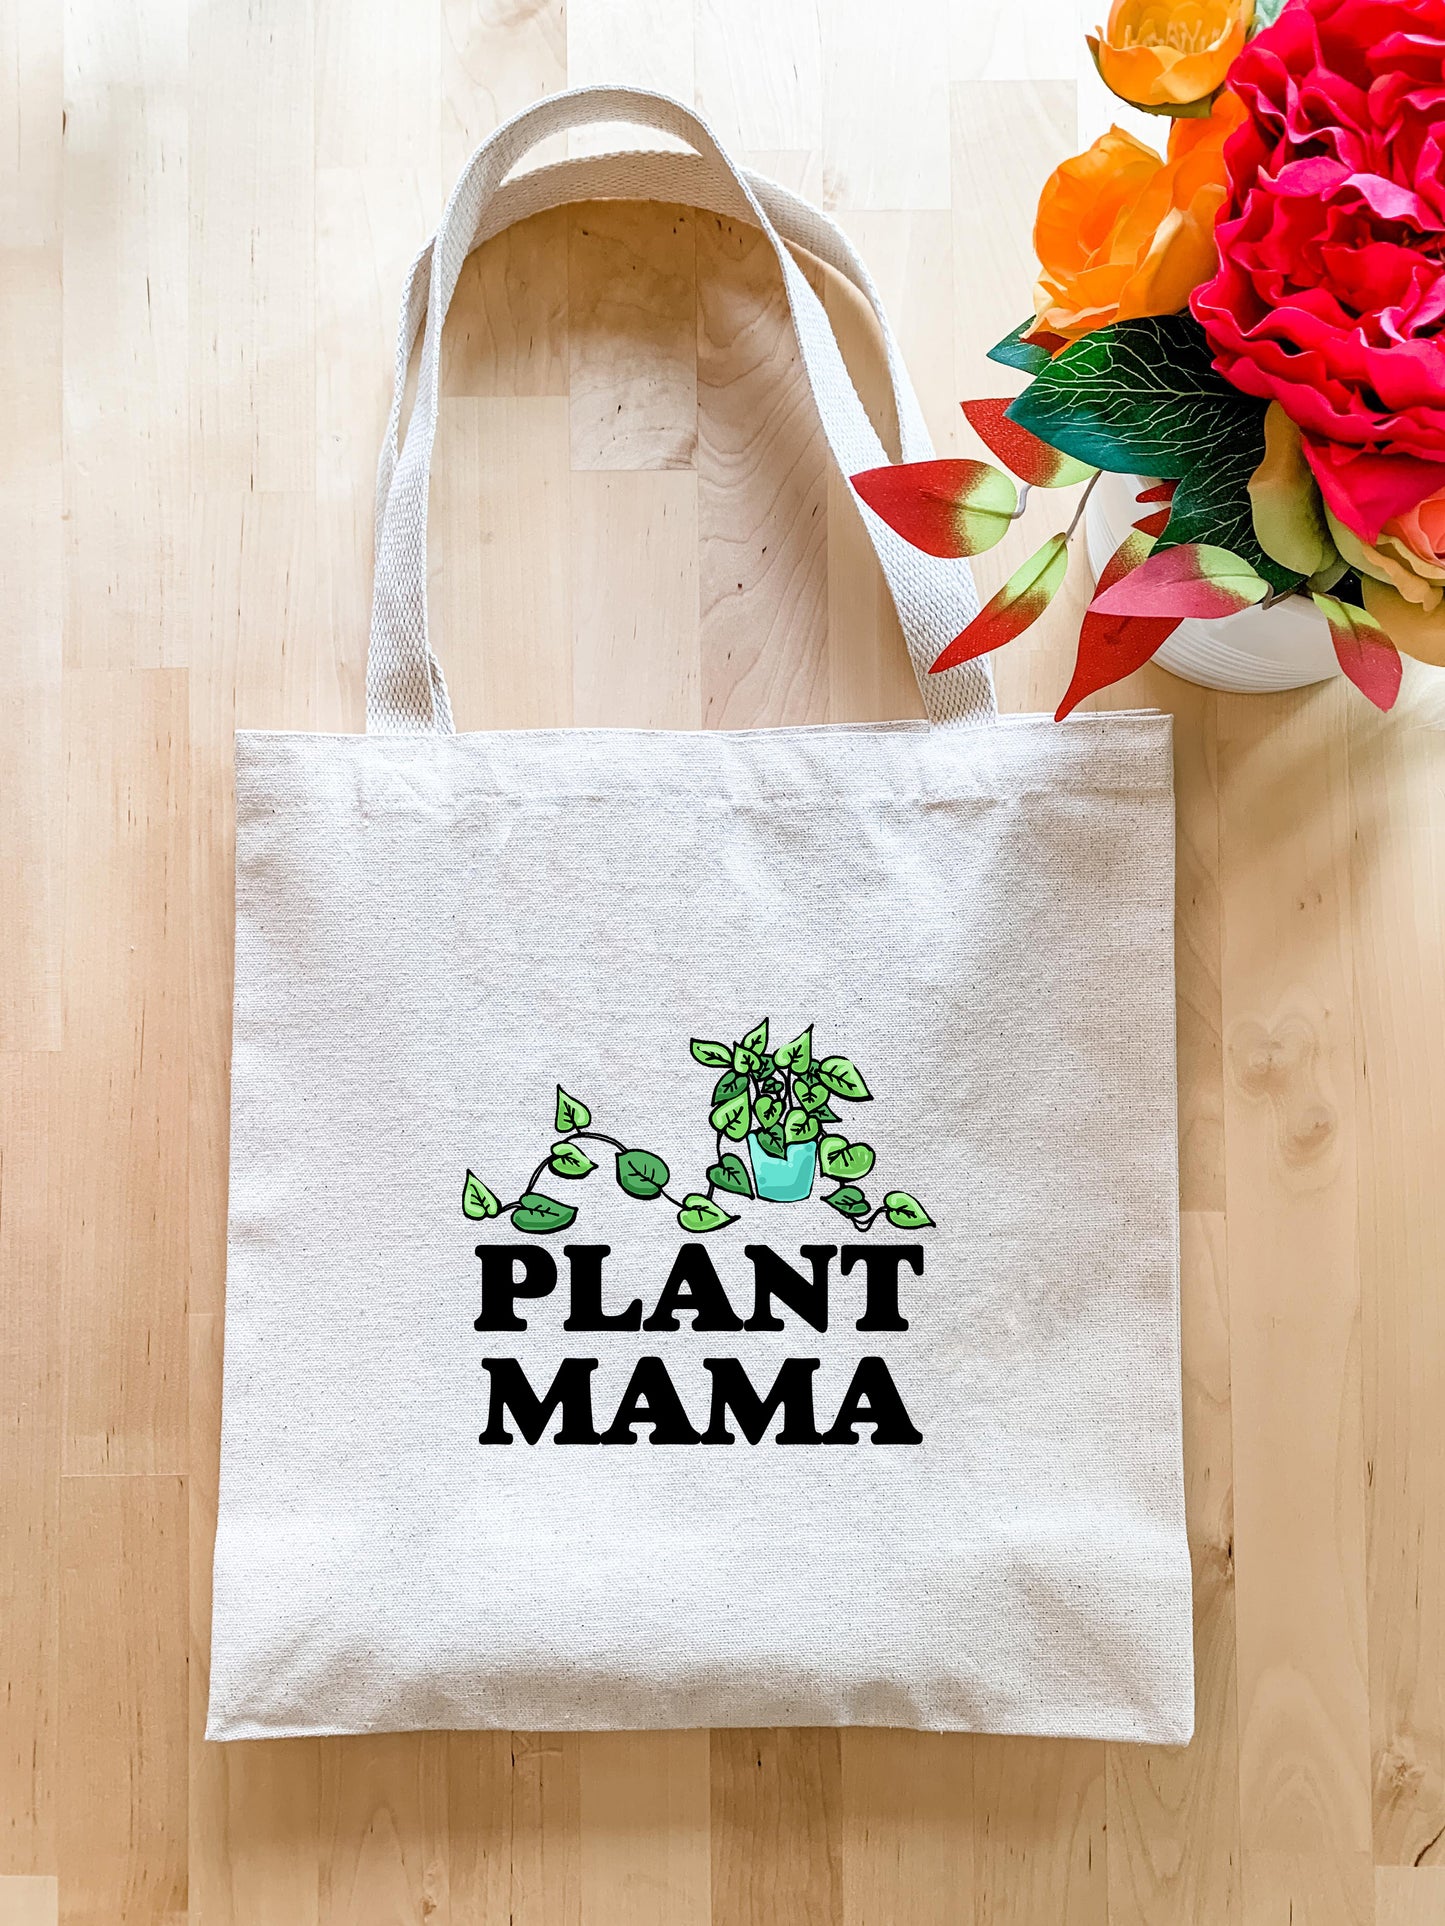 a plant mama tote bag next to a bouquet of flowers